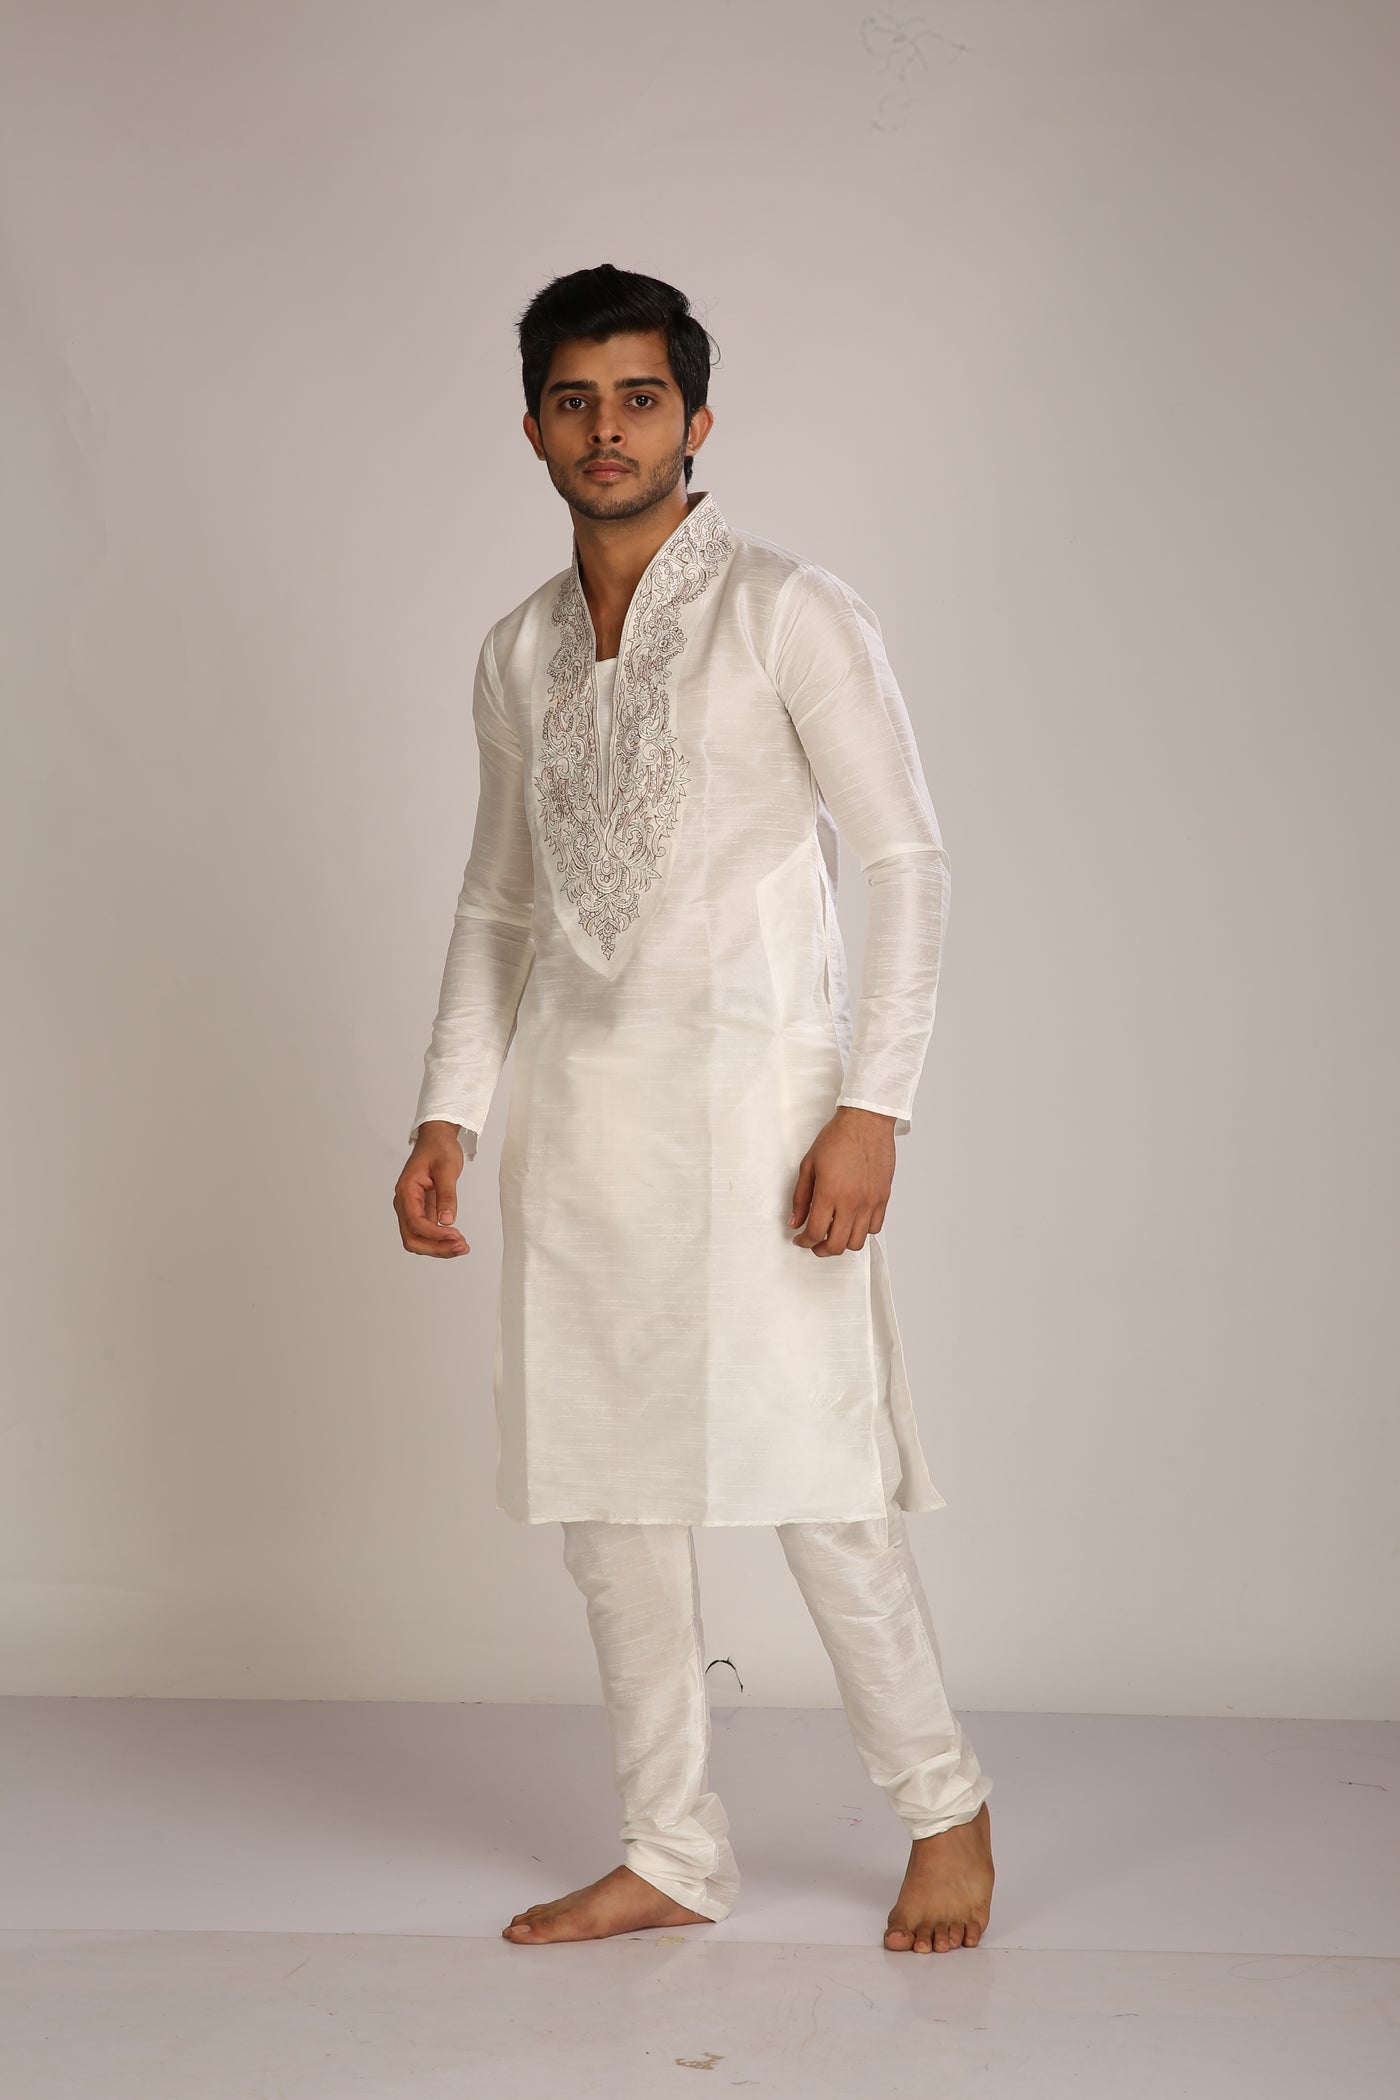 White Glossed Fitted Kurta Indian Clothing in Denver, CO, Aurora, CO, Boulder, CO, Fort Collins, CO, Colorado Springs, CO, Parker, CO, Highlands Ranch, CO, Cherry Creek, CO, Centennial, CO, and Longmont, CO. NATIONWIDE SHIPPING USA- India Fashion X